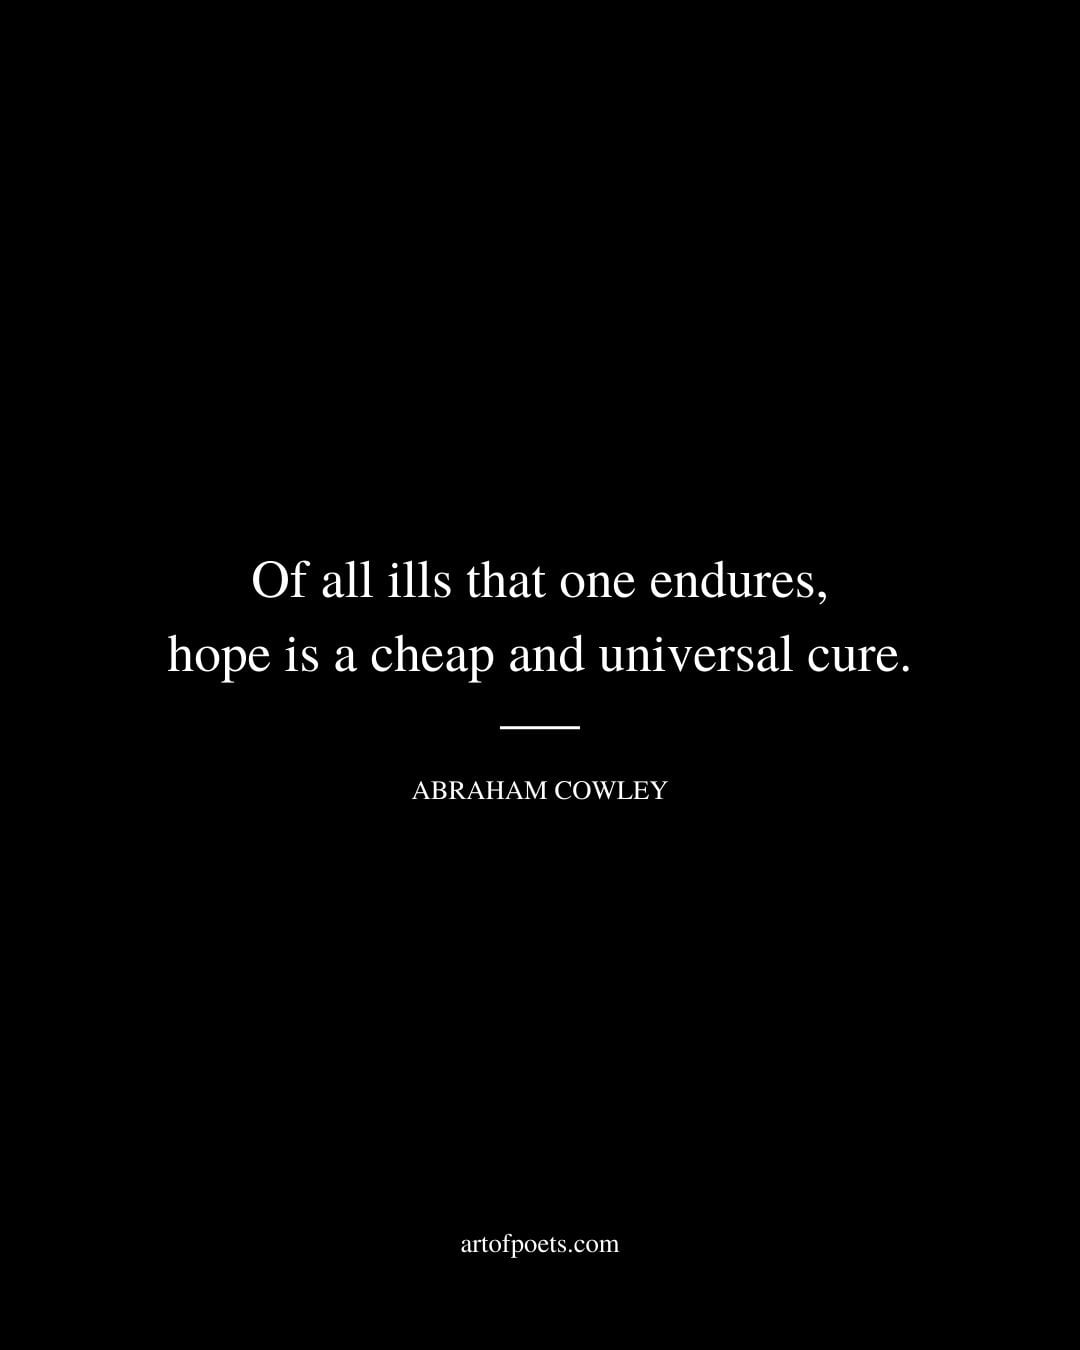 Of all ills that one endures hope is a cheap and universal cure. Abraham Cowley